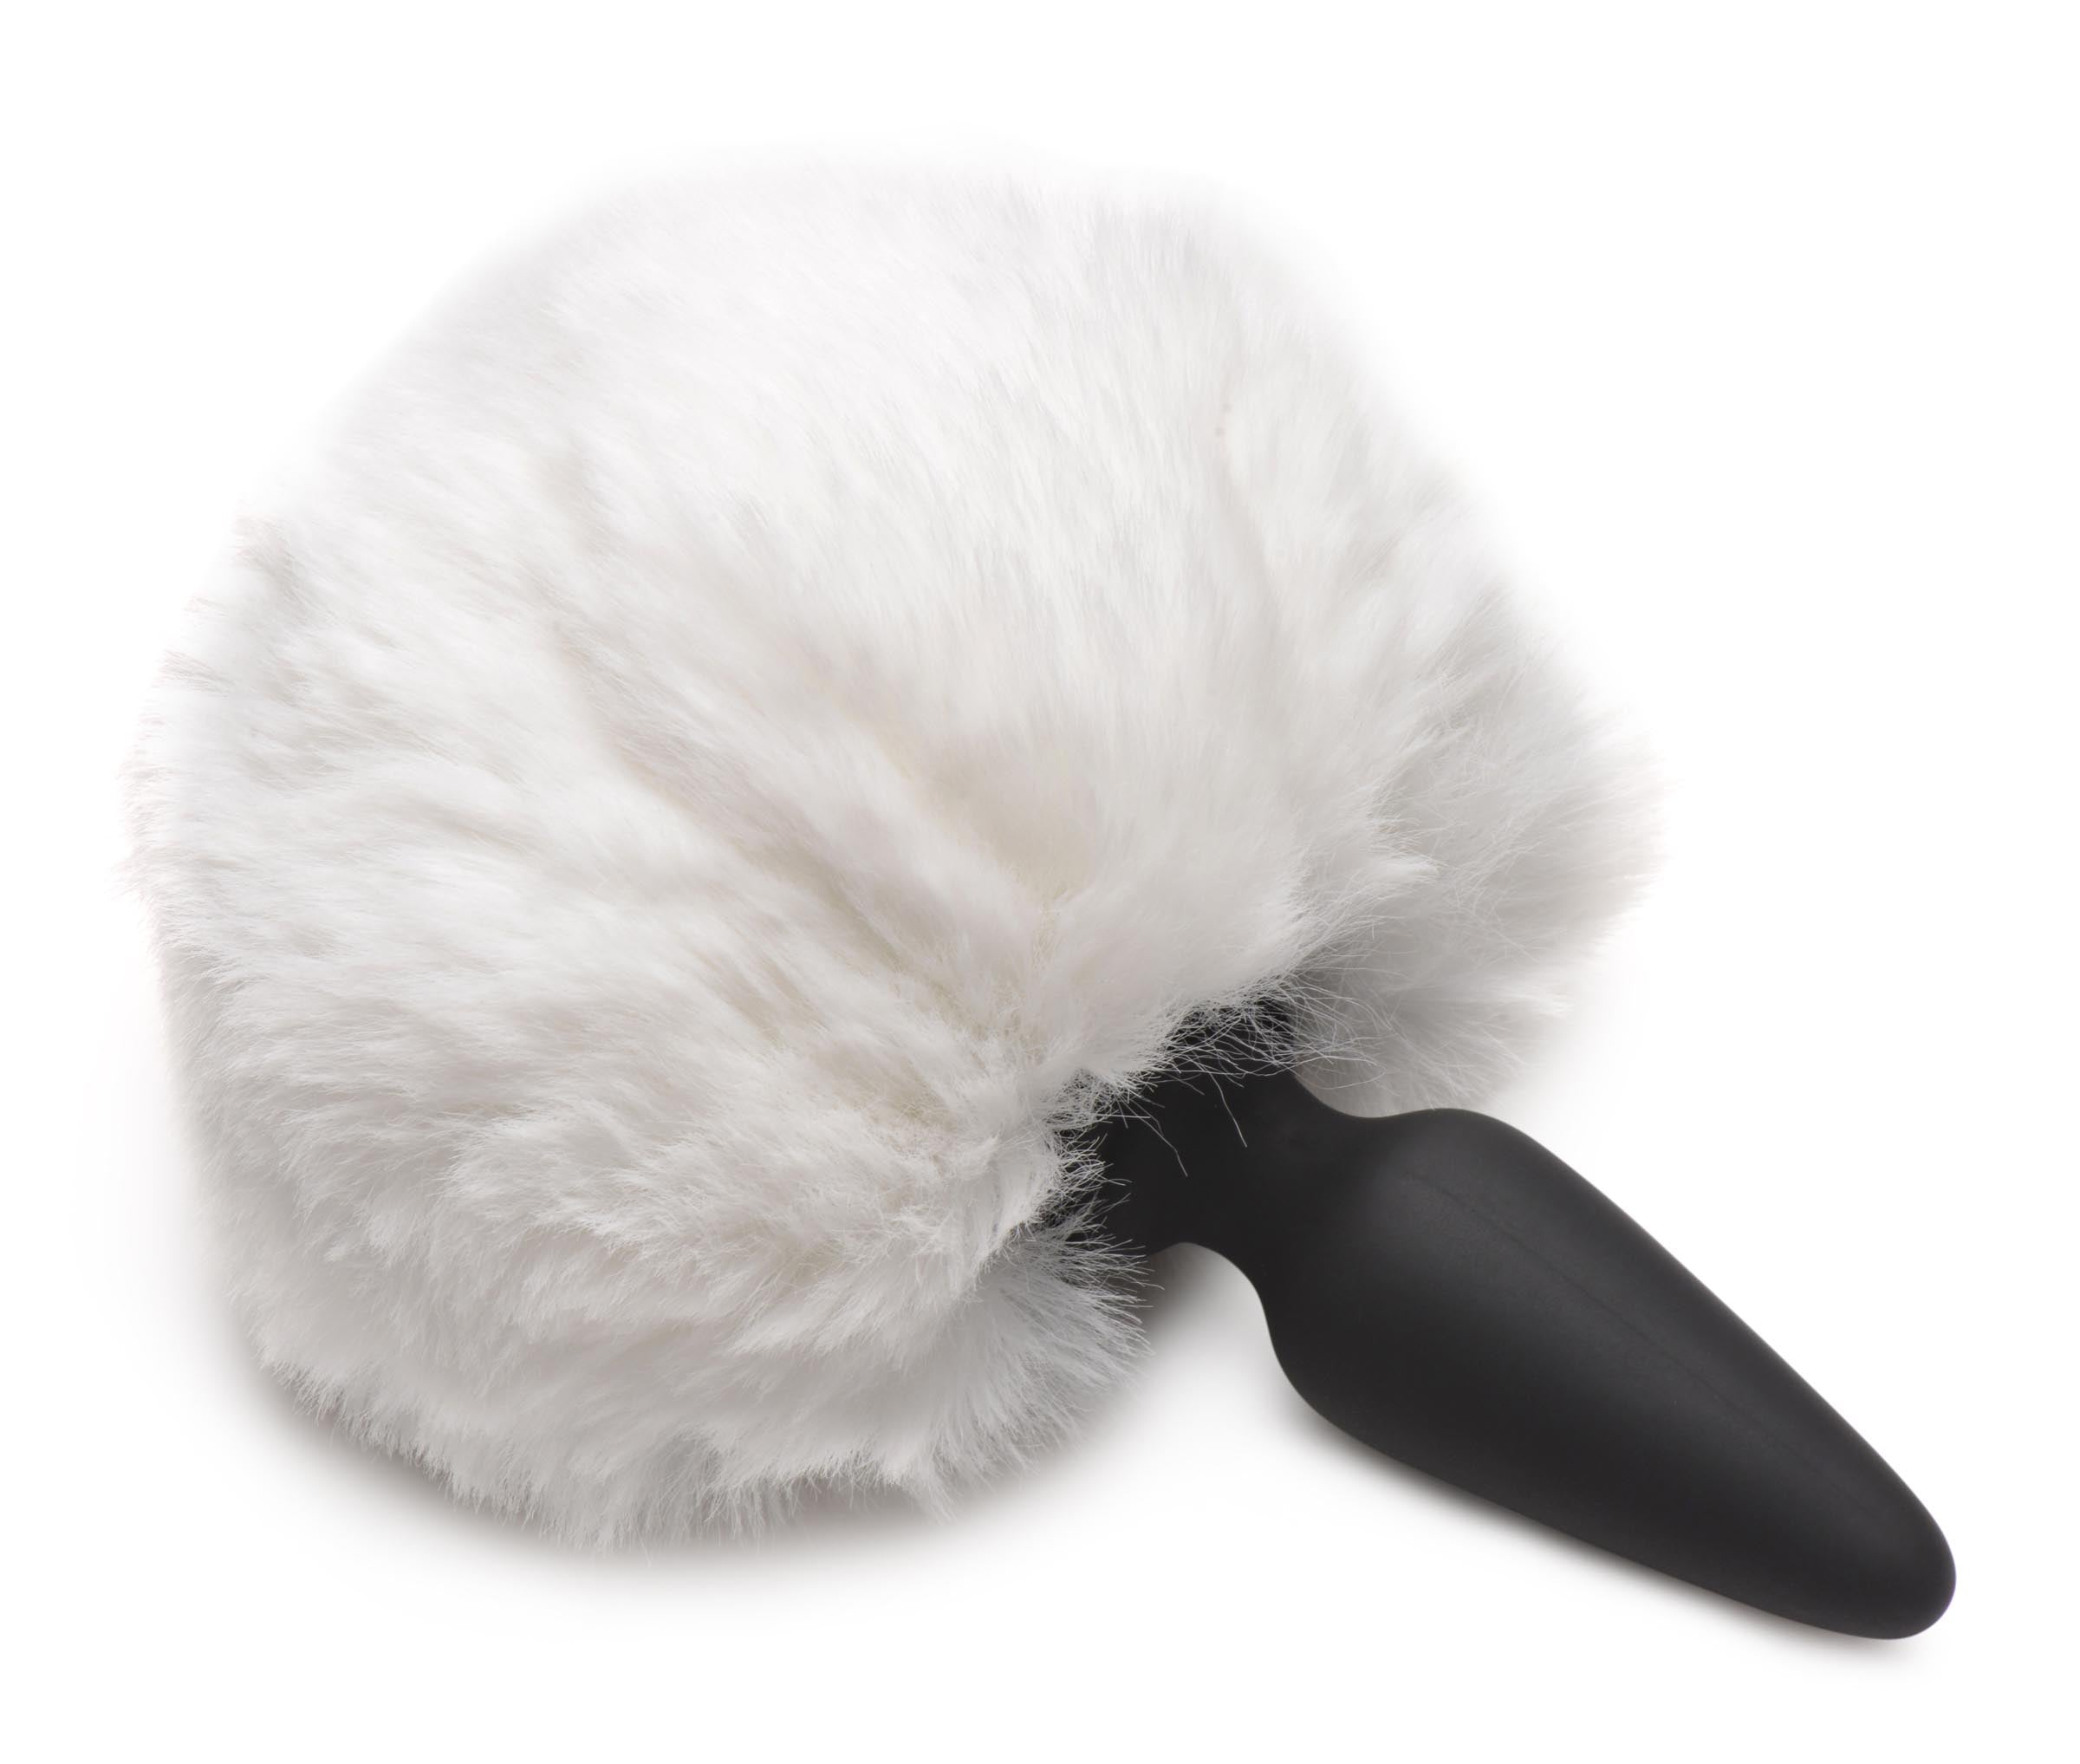 Large Anal Plug with Interchangeable Bunny Tail